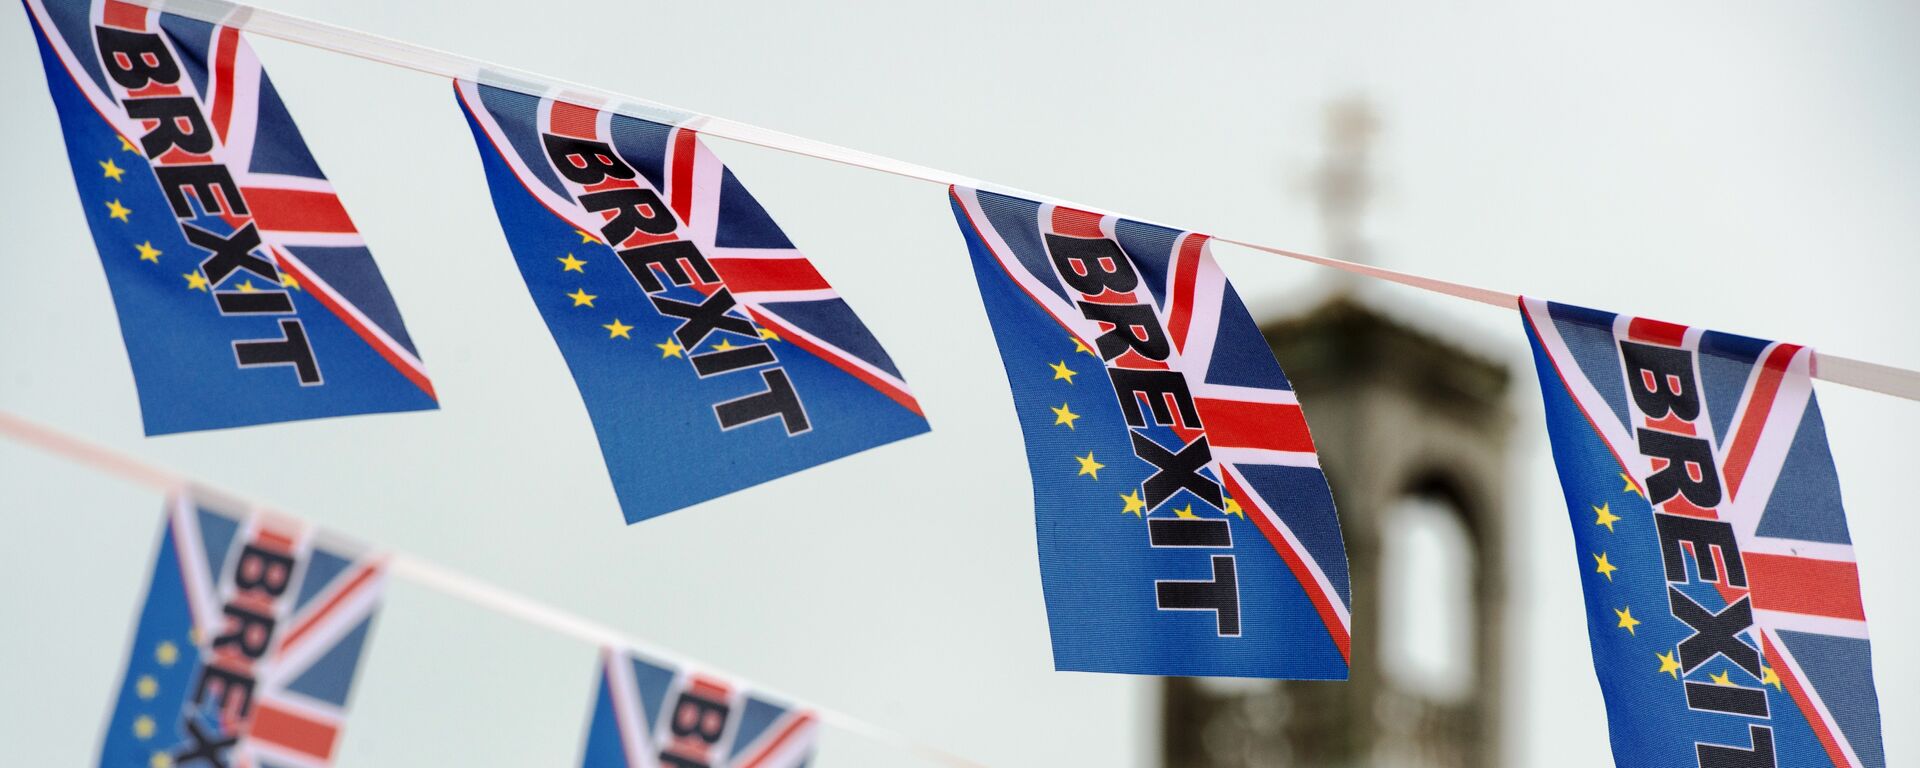 Pro-Brexit flags fly from a fishing boat moored in Ramsgate on June 13, 2016. - Sputnik Mundo, 1920, 02.04.2021